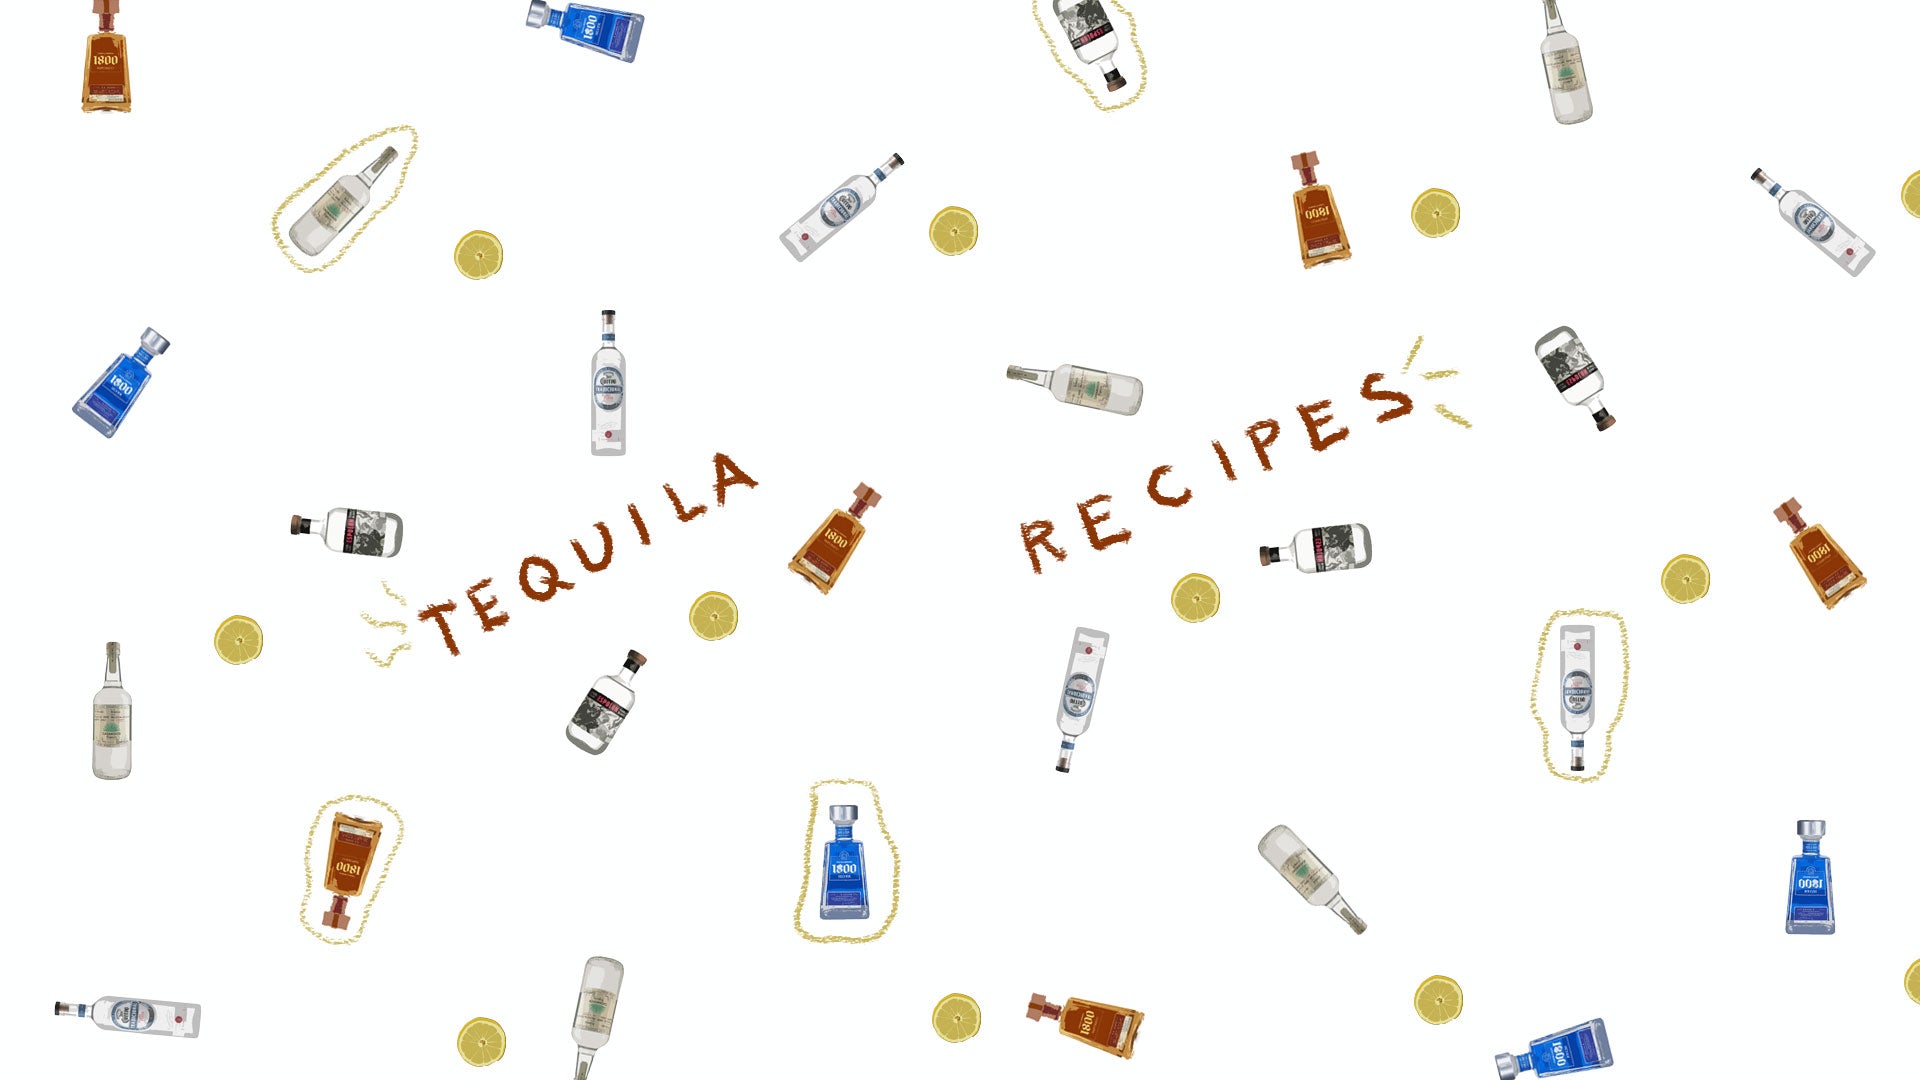 It’s Not a Fiesta Without These Tequila Cocktail Recipes